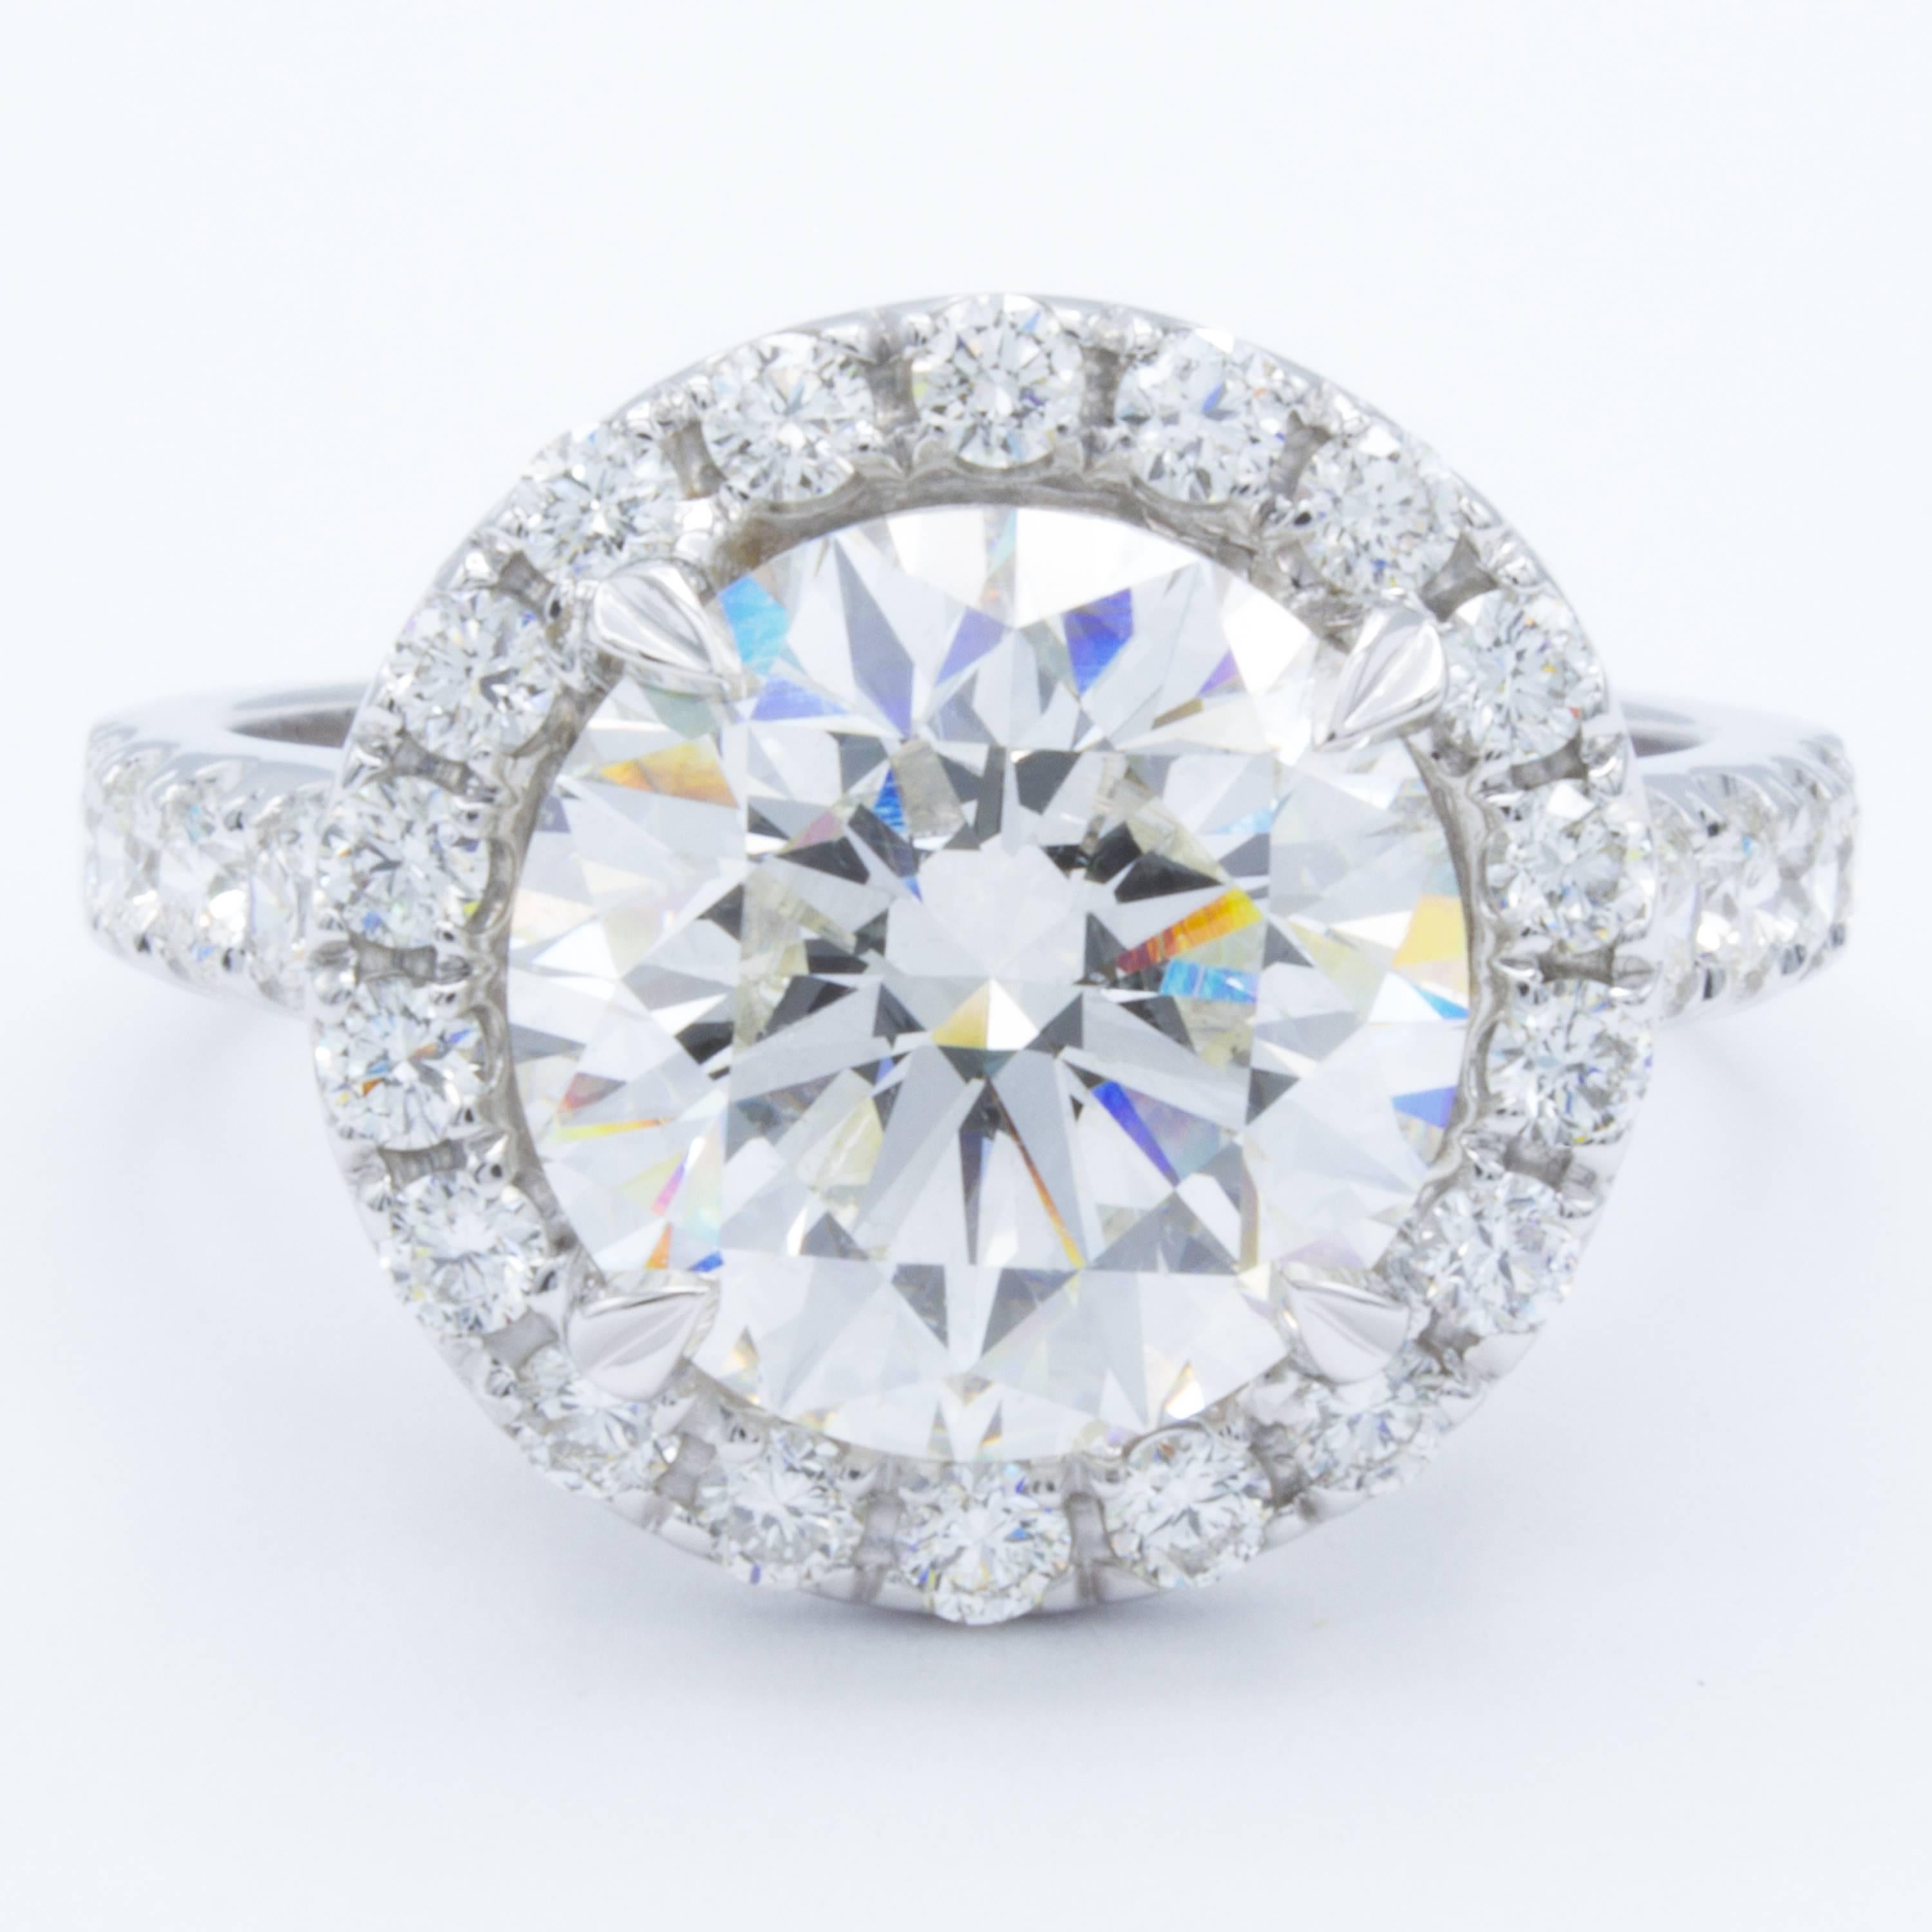 This gorgeous Rosenberg Diamonds & Co. engagement ring shows a GIA certified 4.00 carat round brilliant cut diamond unfurled within petals of glittering white pave set diamond accents on a band of 18Kt white gold. Designed by David Rosenberg.
 
